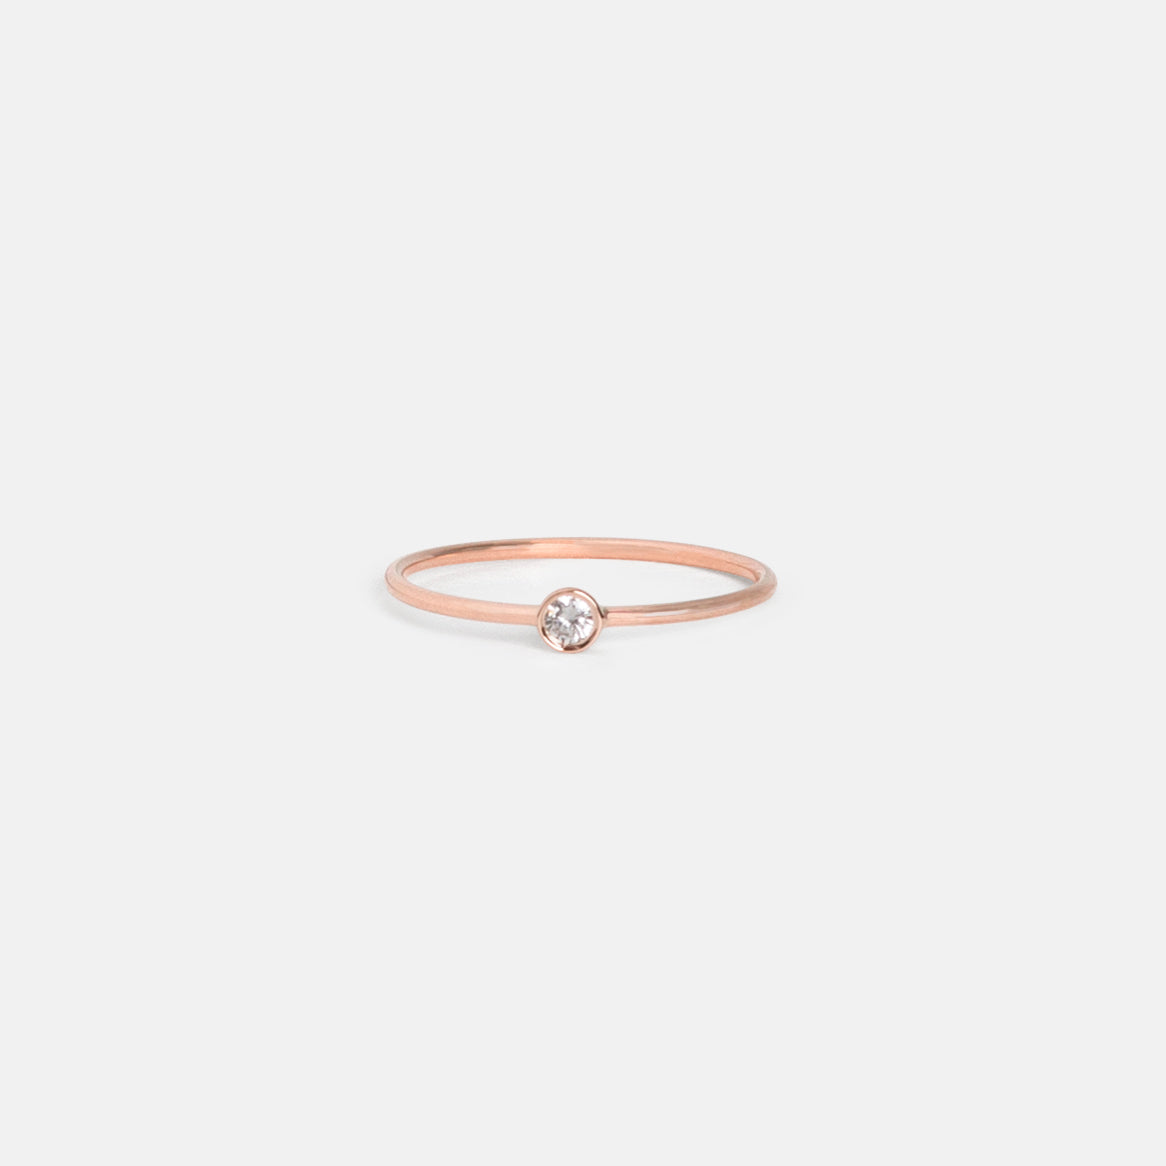 Large Kaya Ring in 14k Rose Gold set with White Diamond by SHW Fine Jewelry